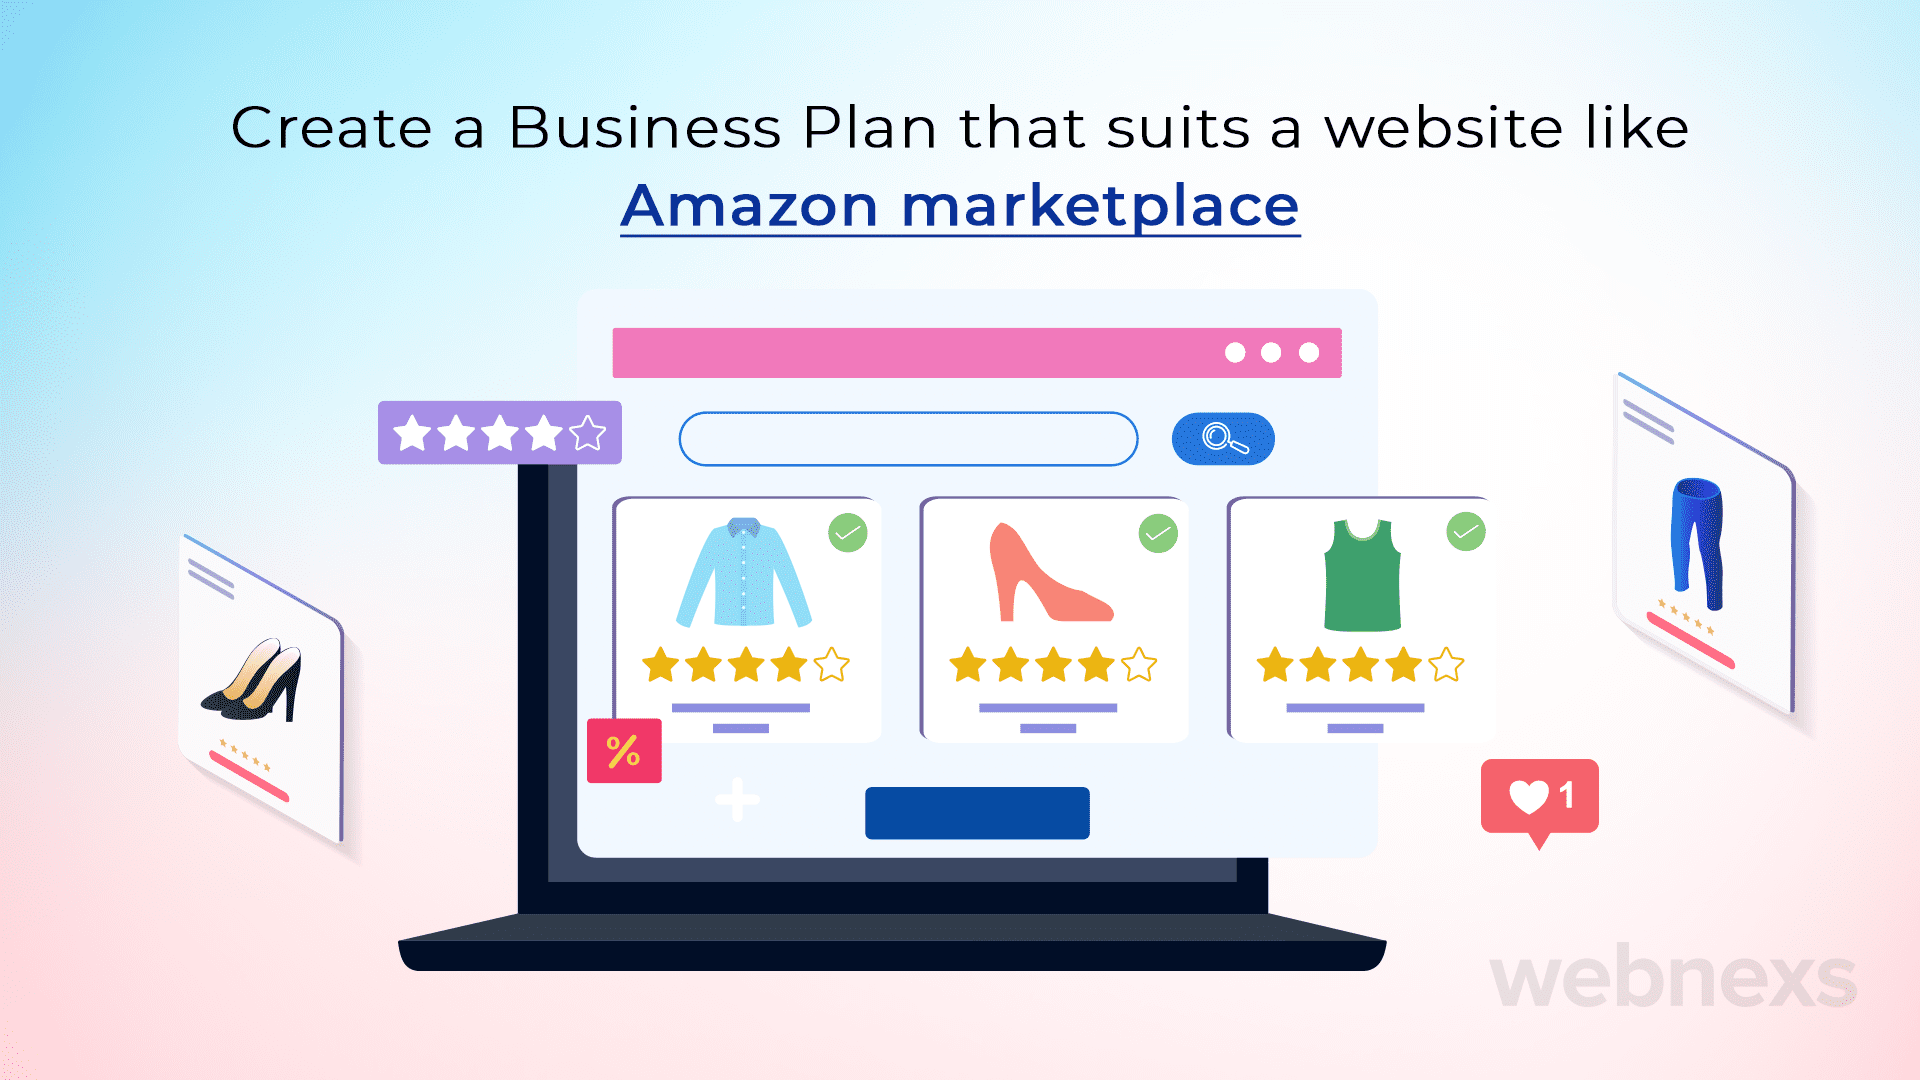 Step 01: Create a Business Plan that suits a website like Amazon marketplace